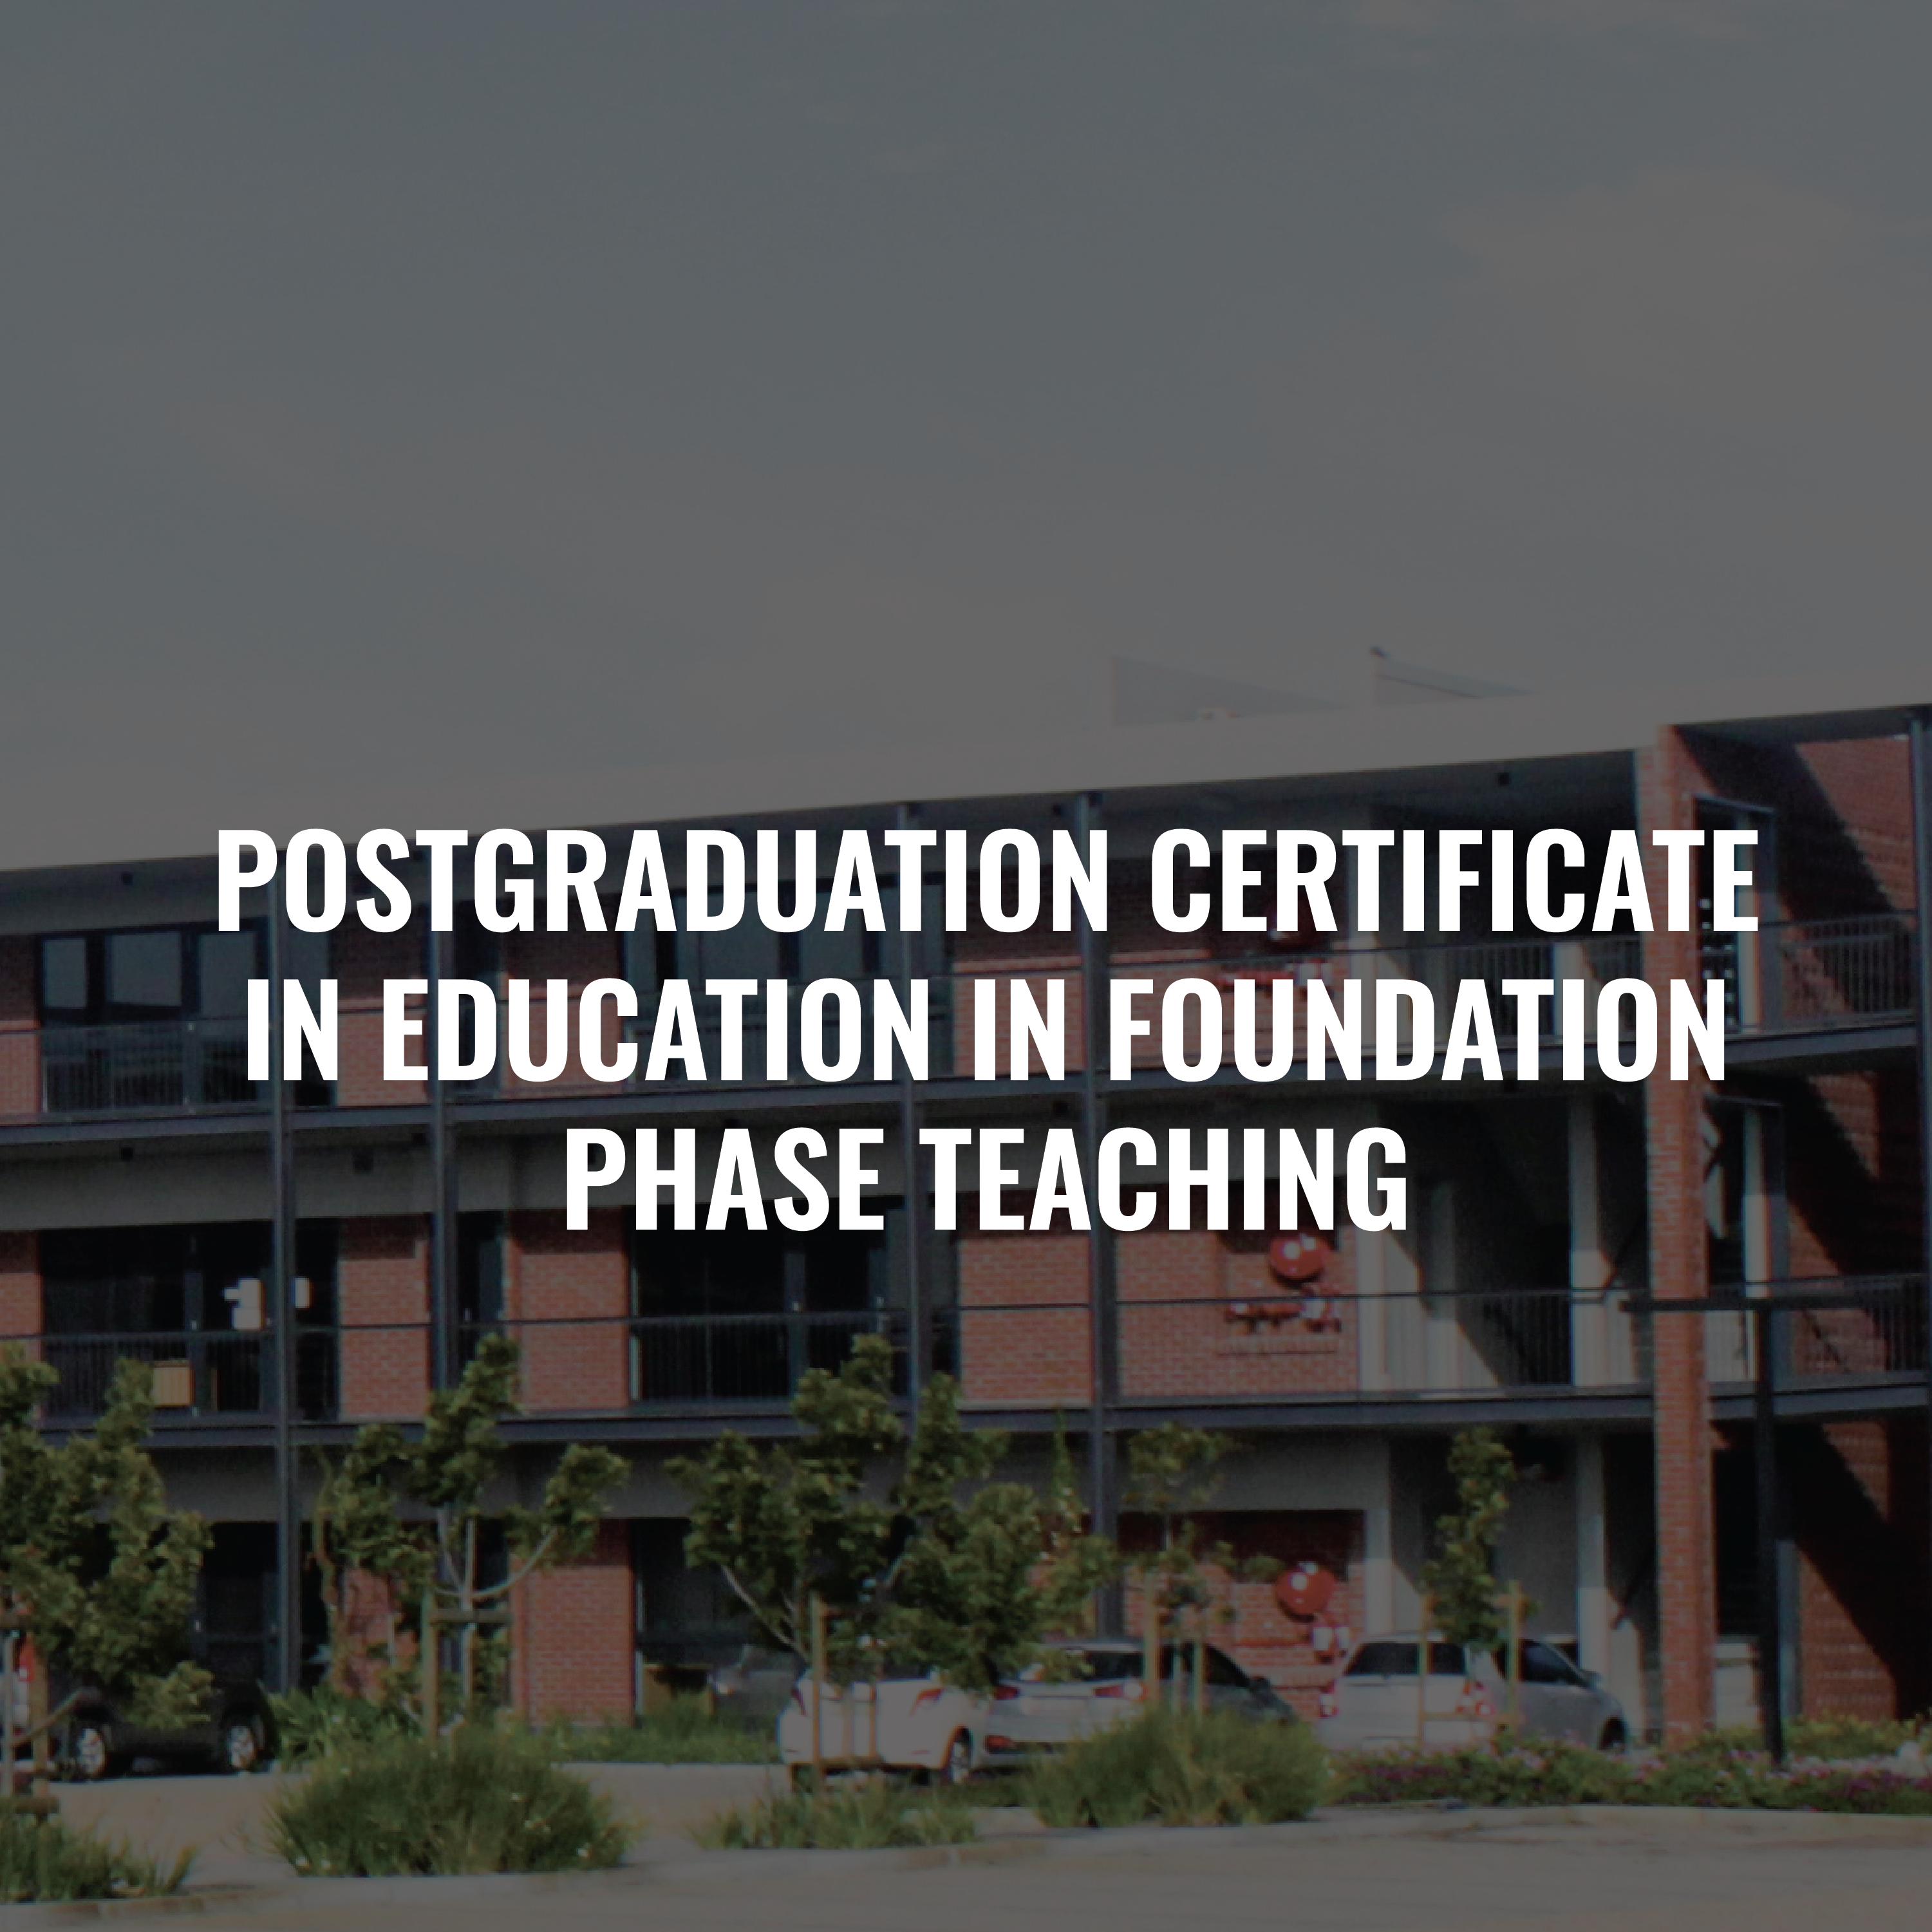 POSTGRADUATION CERTIFICATE IN EDUCATION IN FOUNDATION PHASE TEACHING